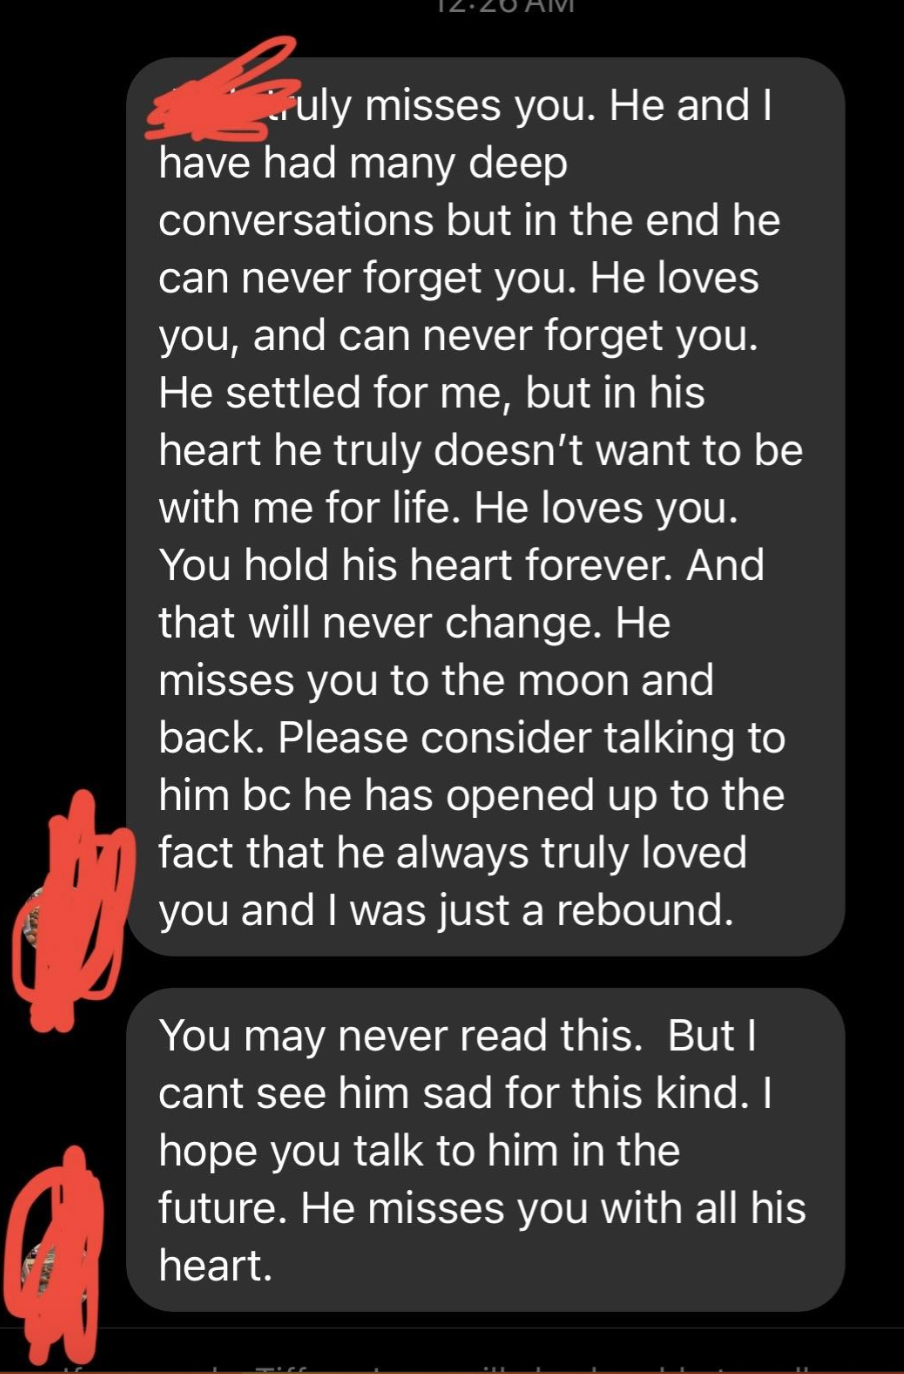 Text message expressing deep longing and hope for reconciliation, with portions redacted